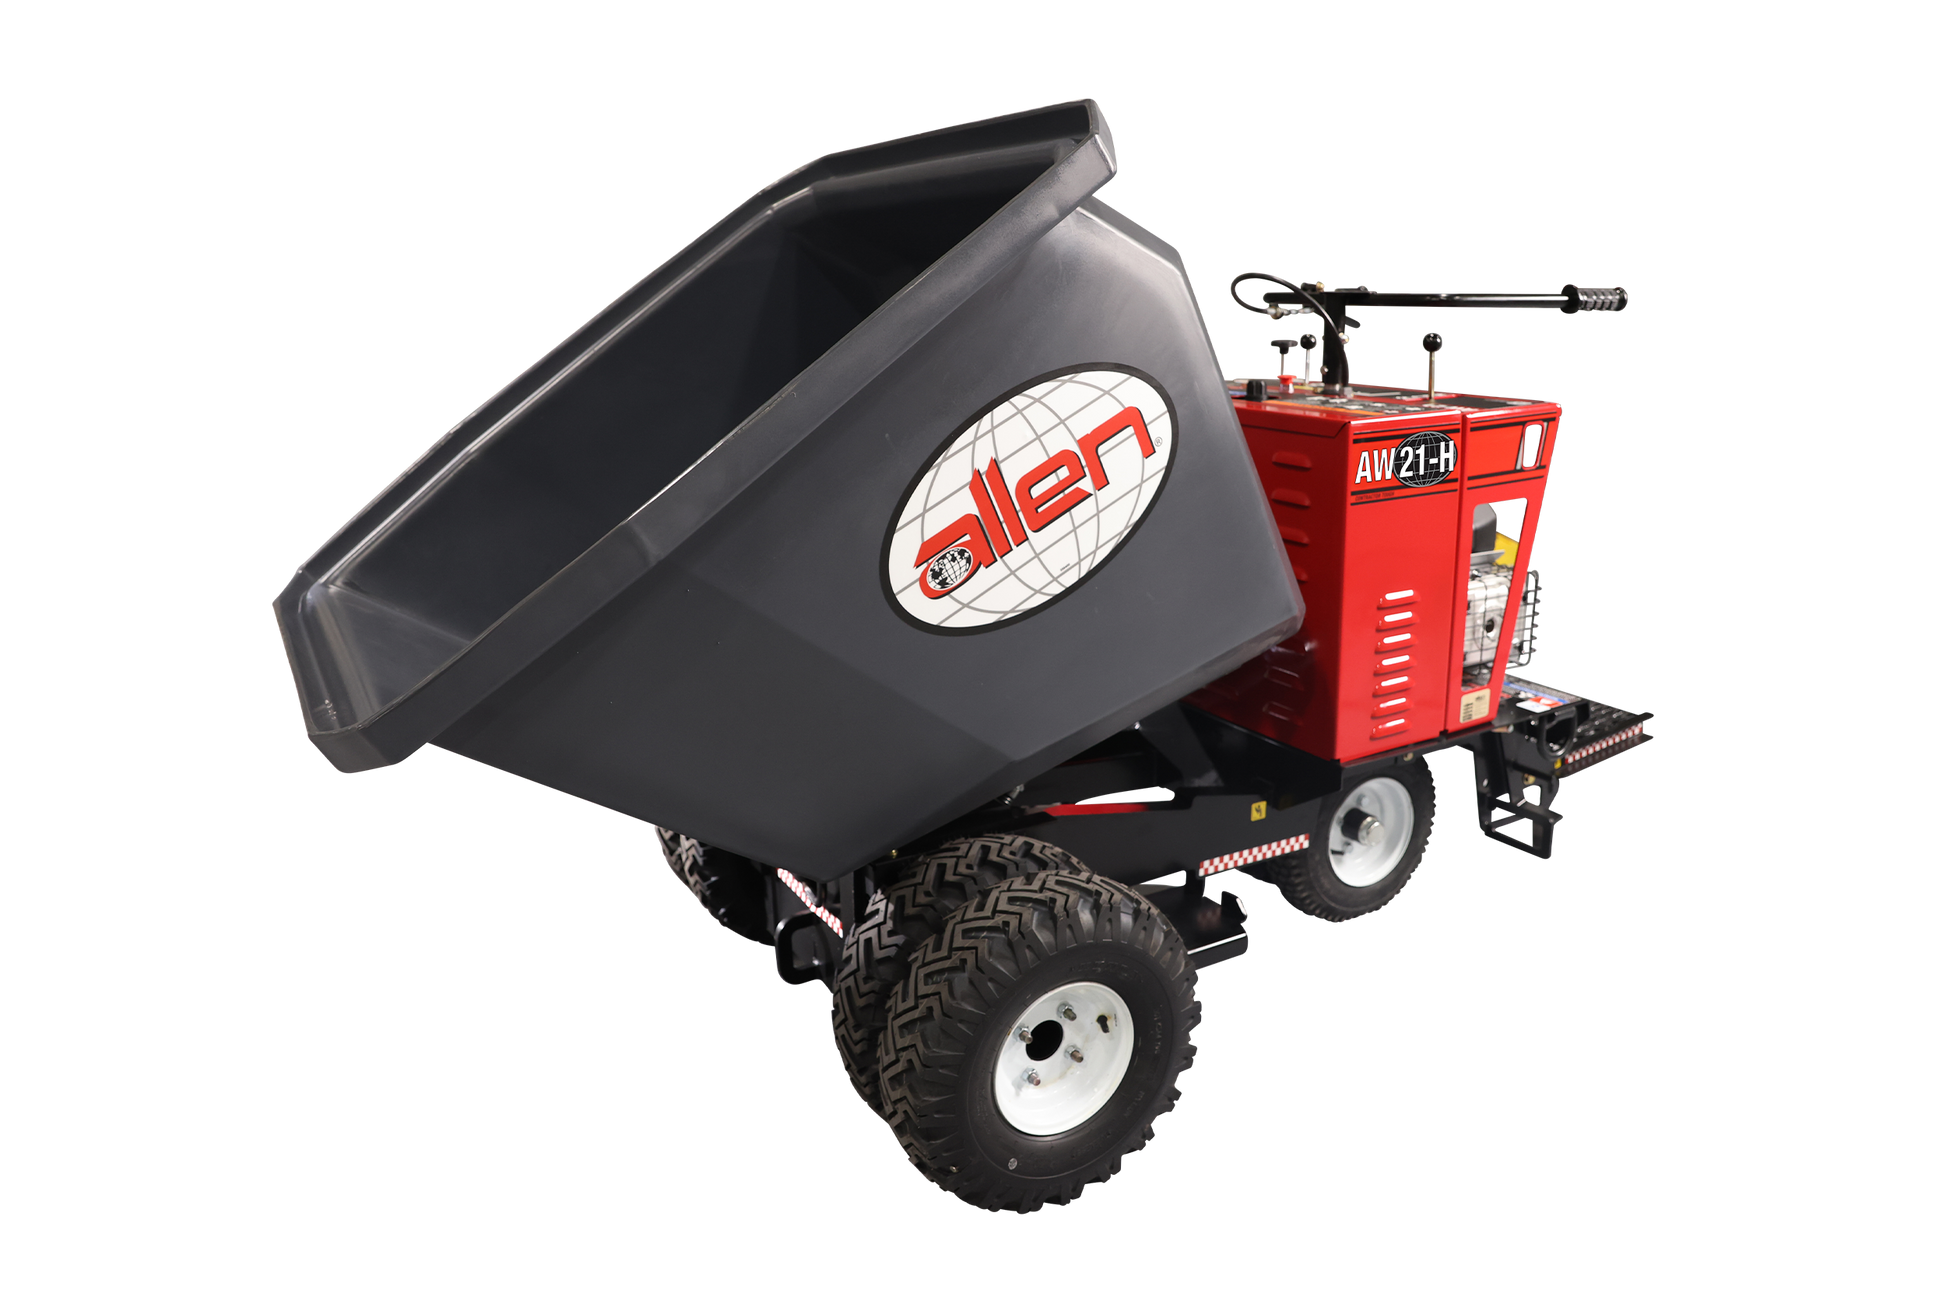 Allen Engineering Power Buggy with Electric Start-AW21-H